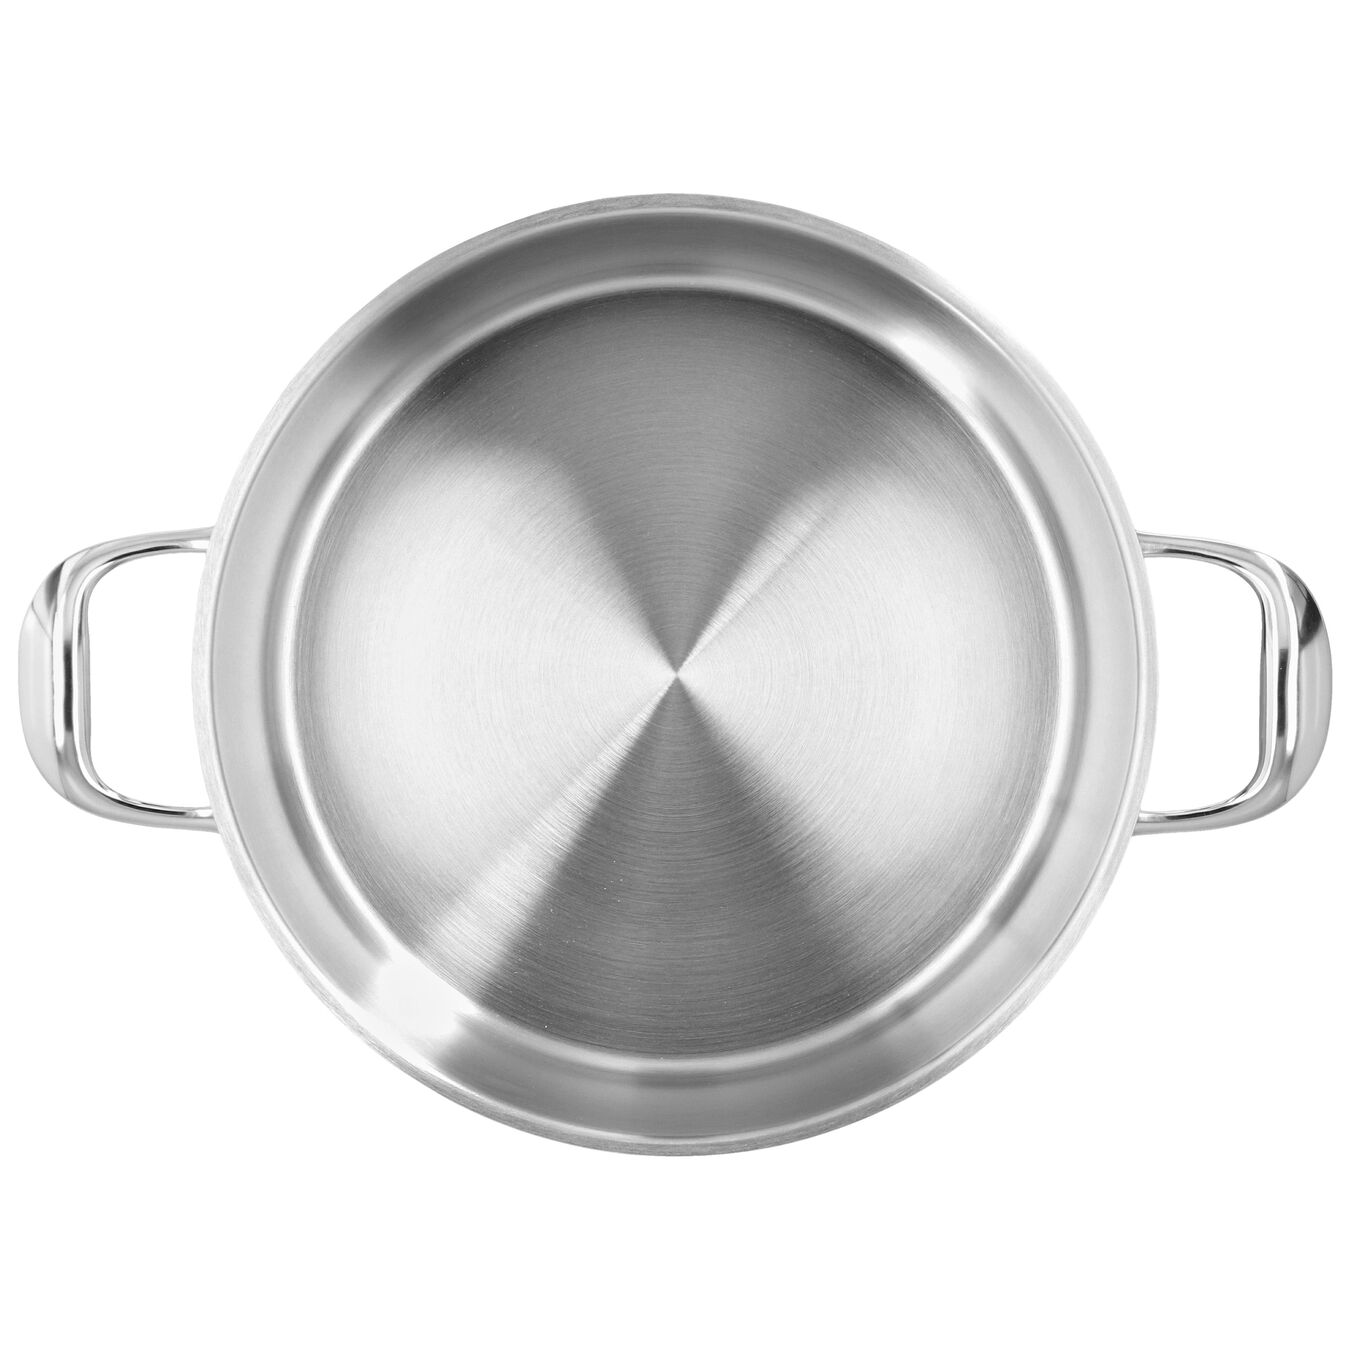 5.5 qt, 18/10 Stainless Steel, Dutch Oven with lid,,large 5